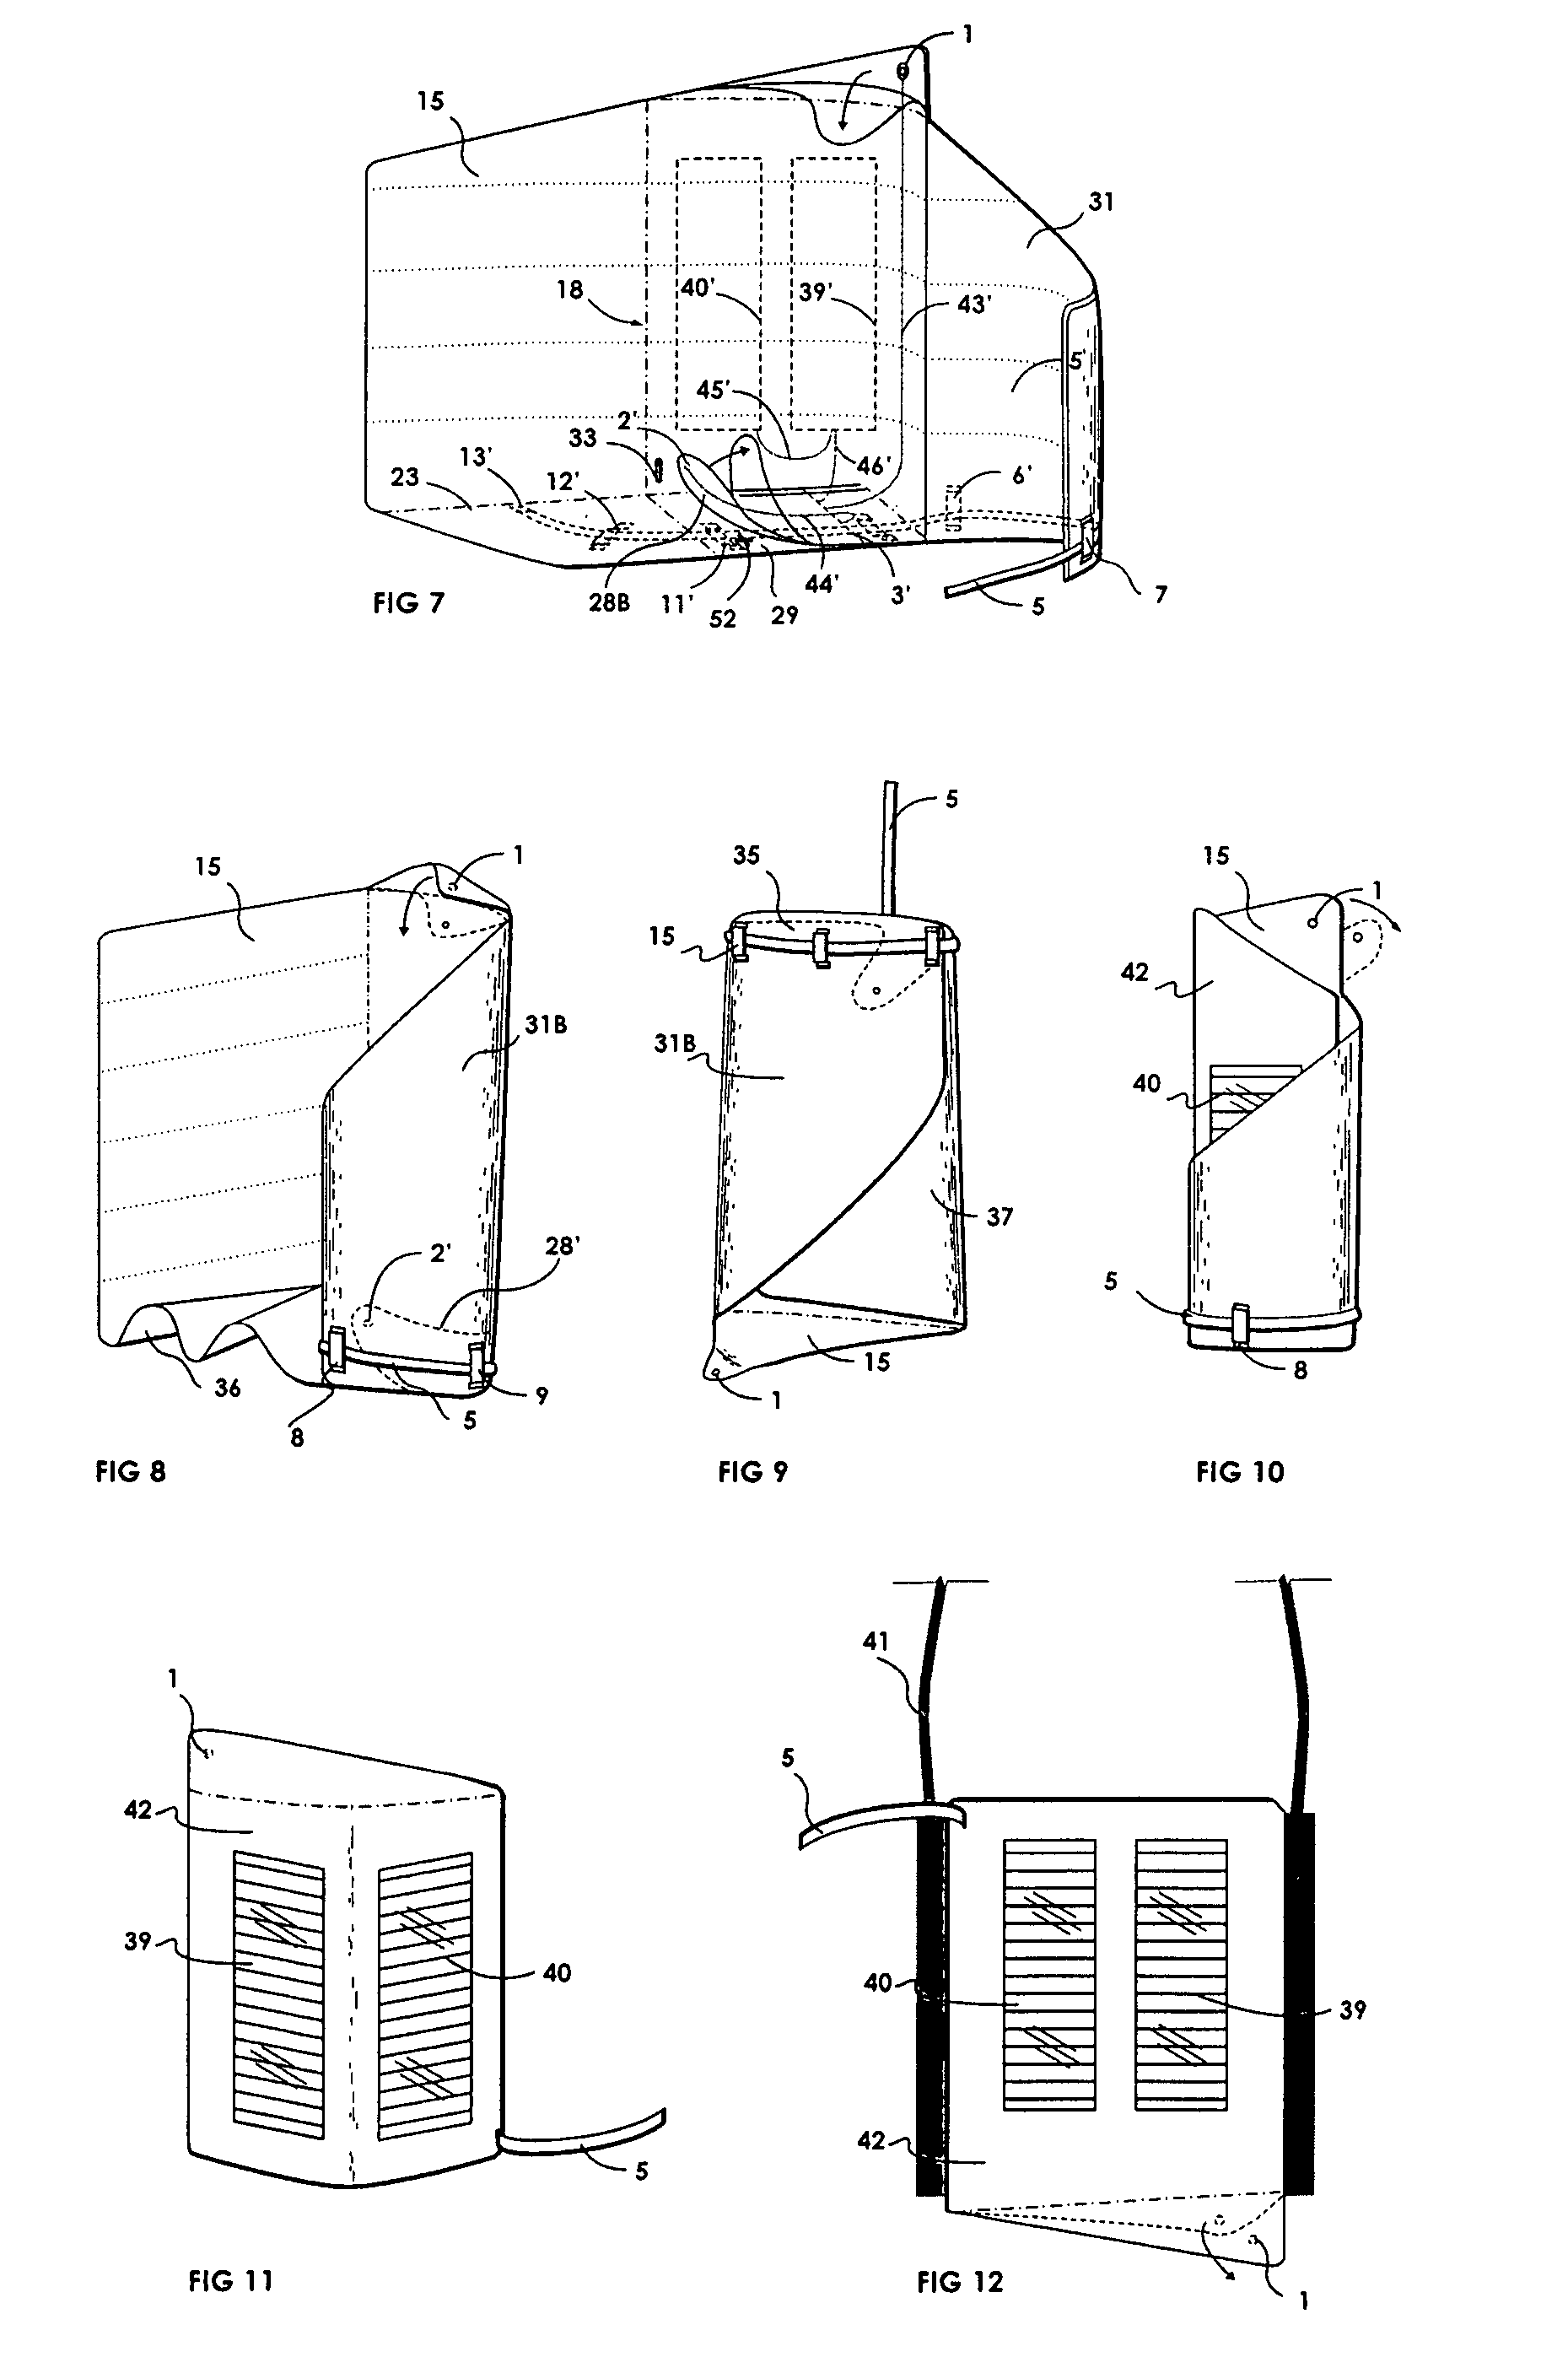 Portable lighting and power-generating system